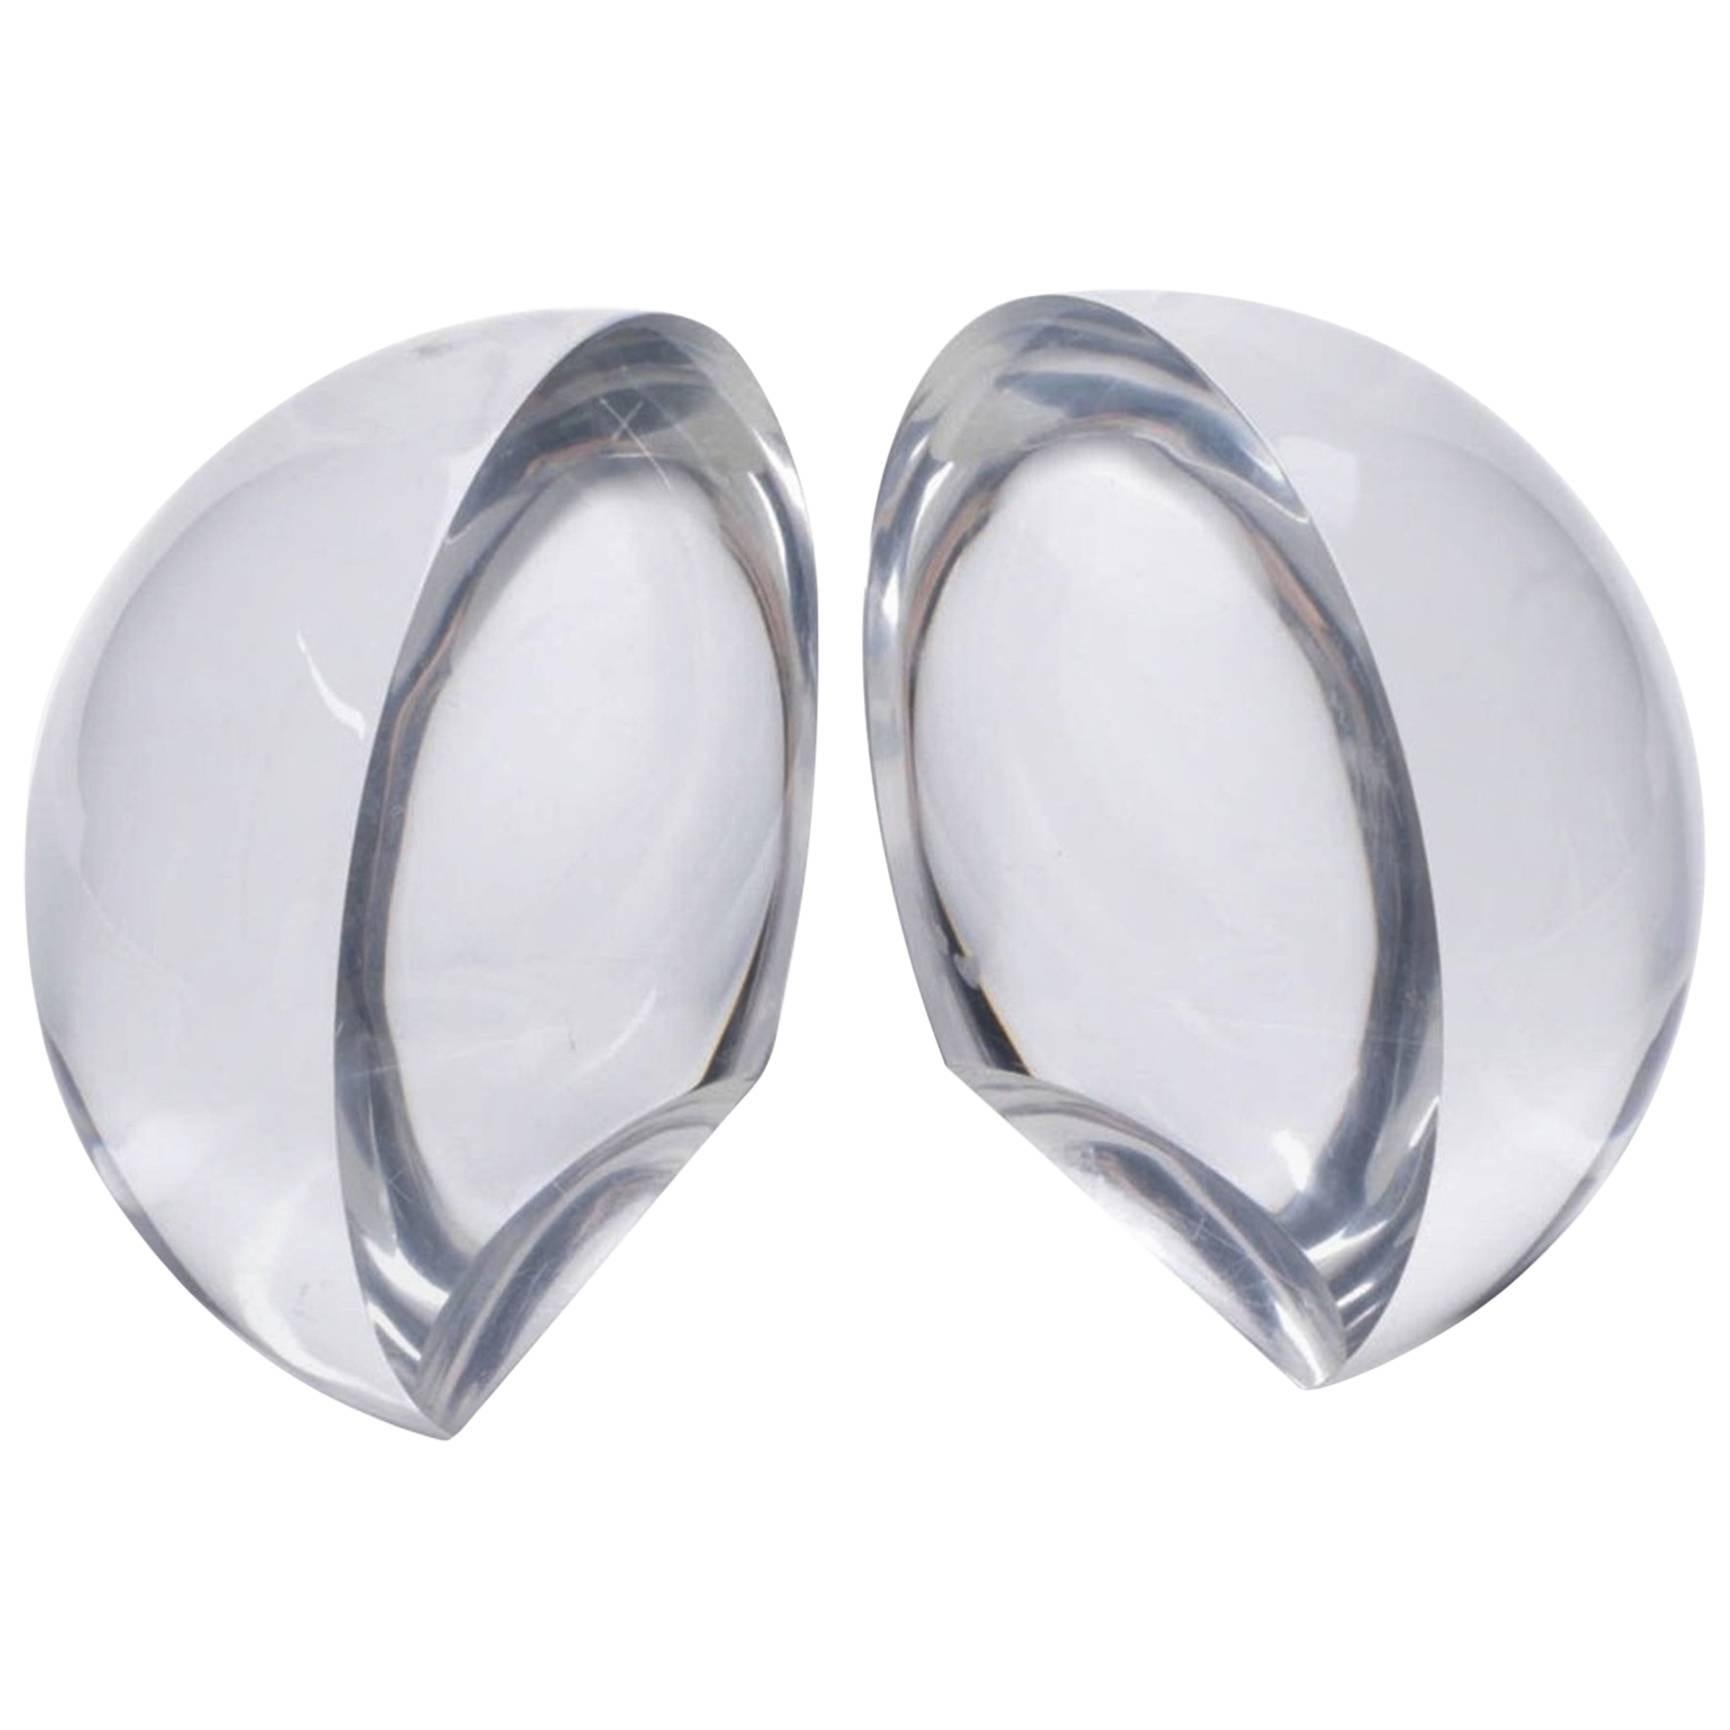 Spherical Shape Lucite Bookends